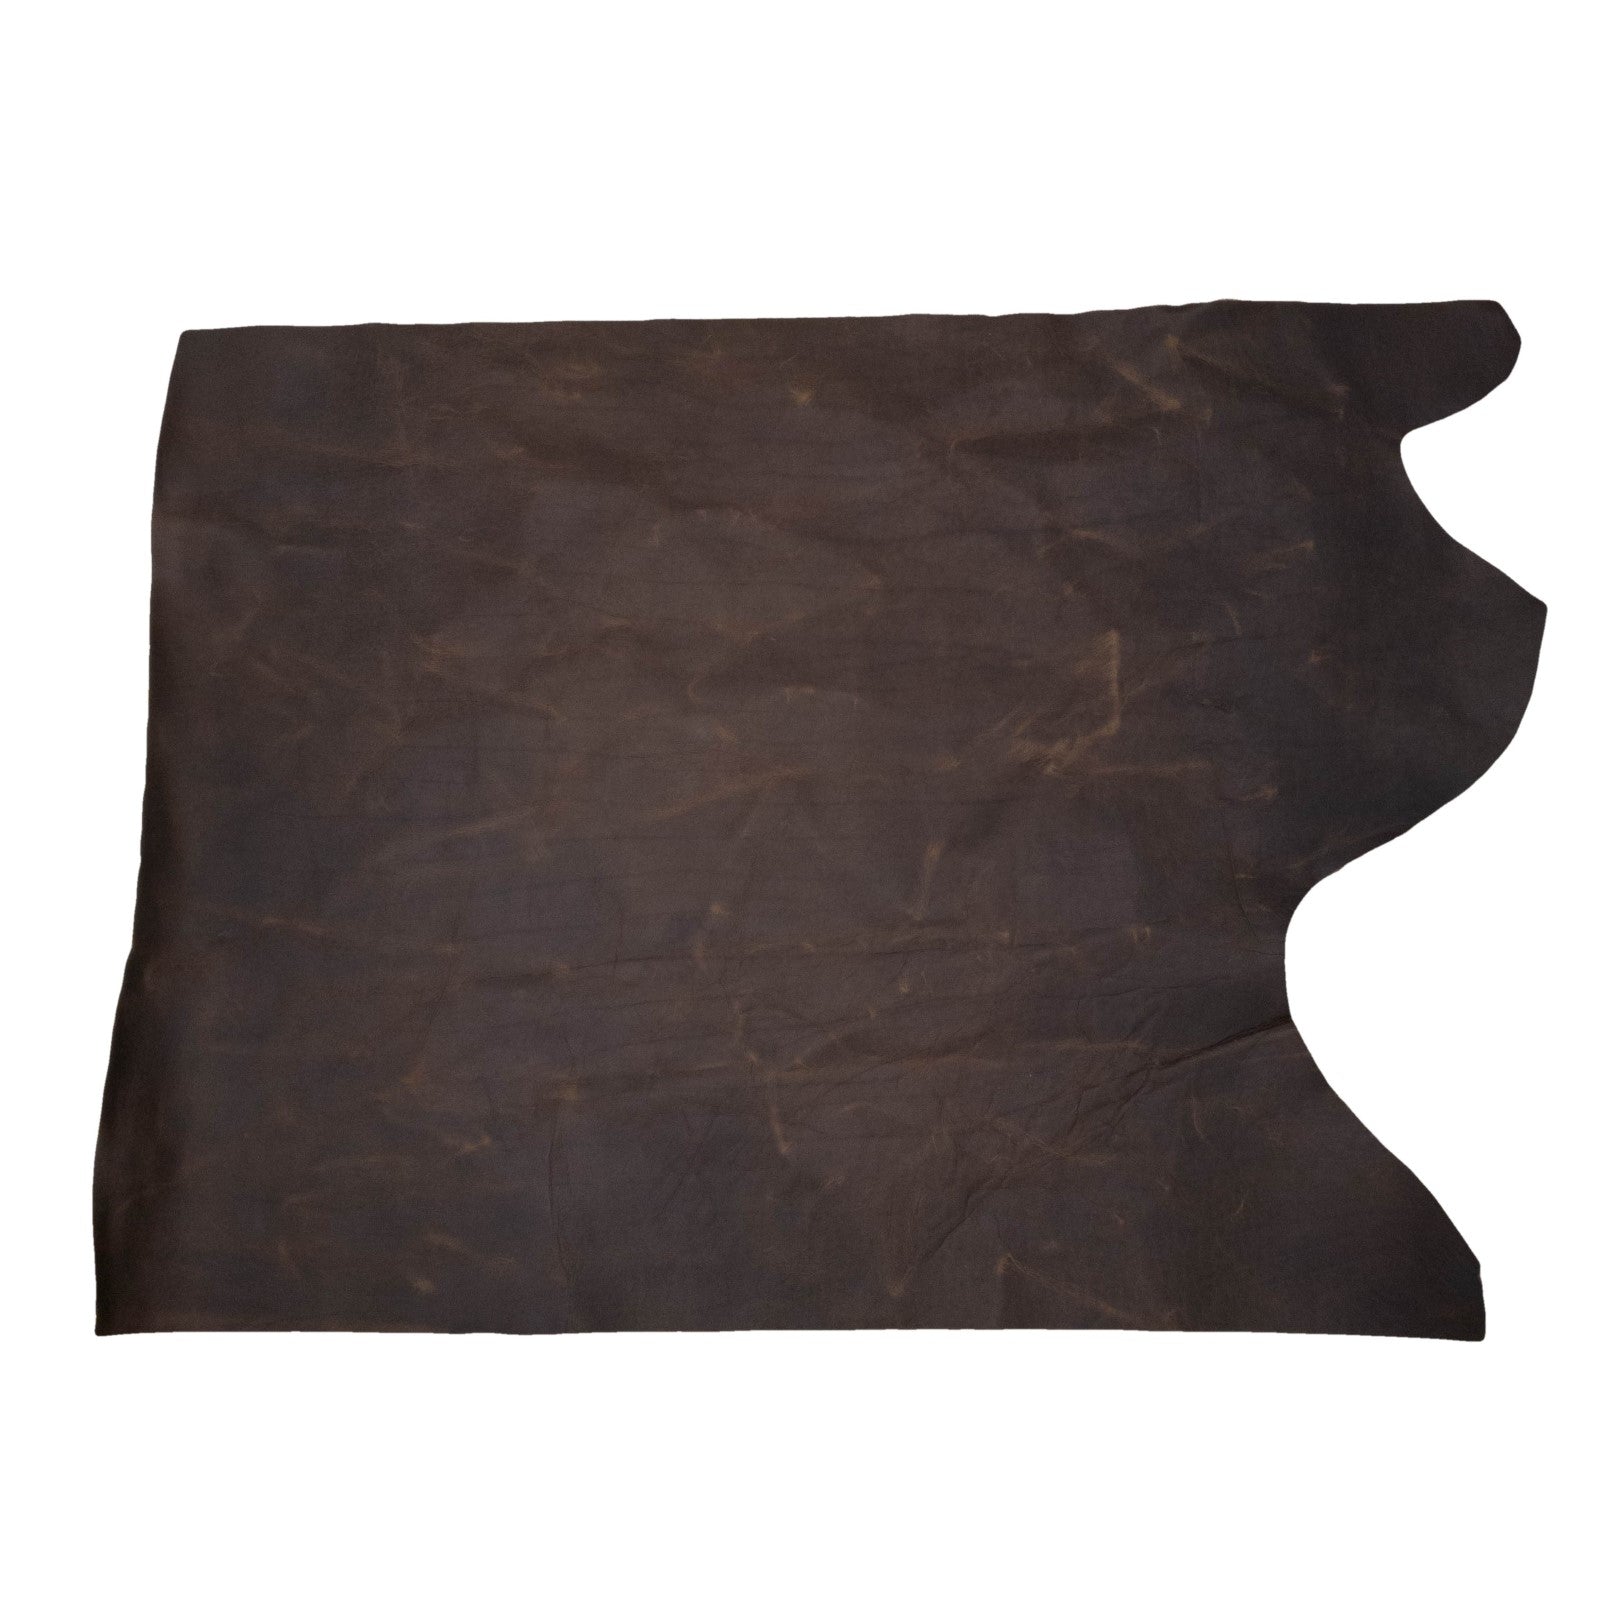 Sleeping Bear Dark Brown, 6.5-32 SqFt, 2-3 oz, Pull up Sides & Pieces, Crazy Buffalo, 6.5-7.5 / Project Piece (Middle) | The Leather Guy